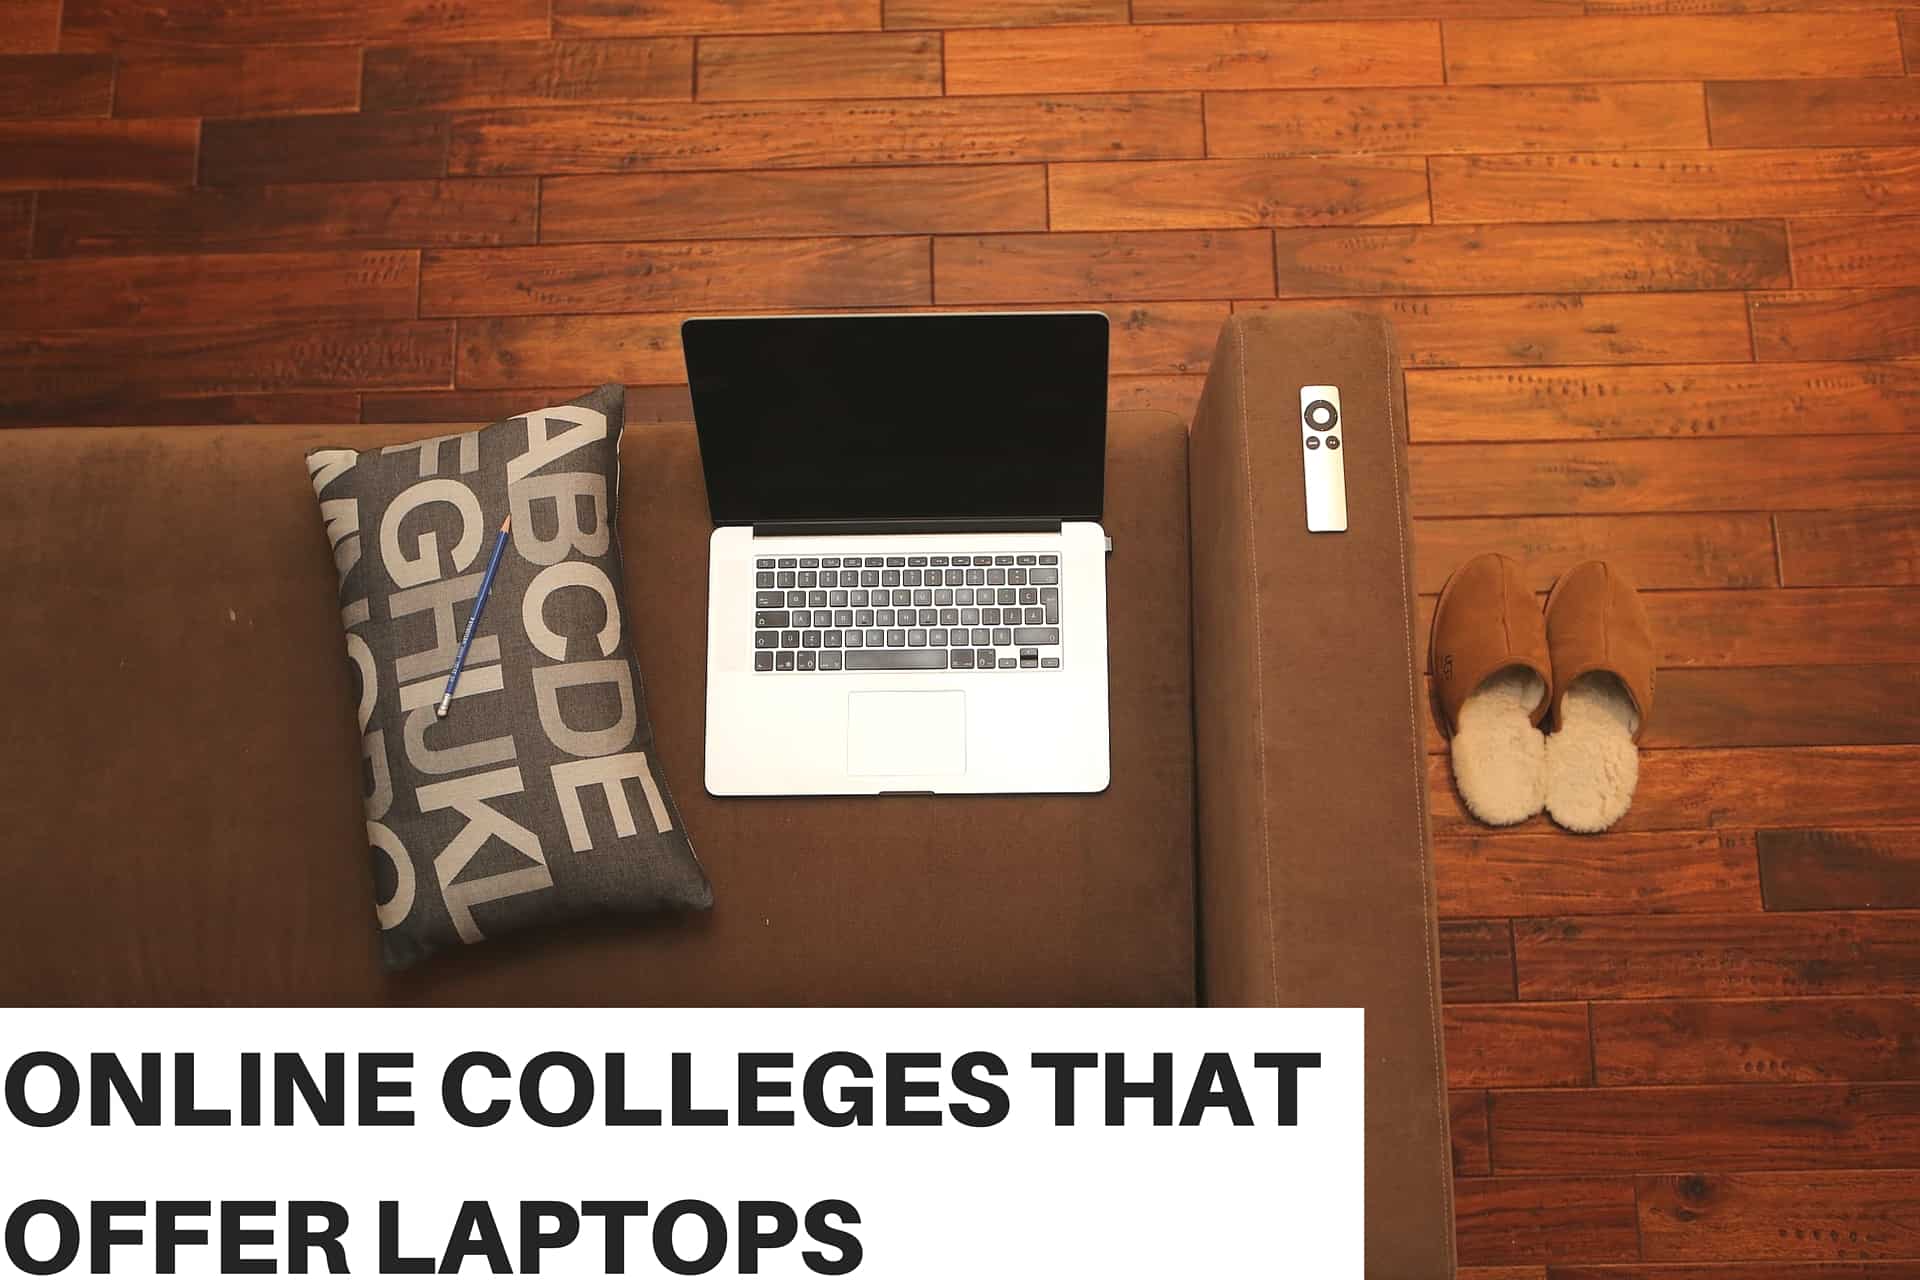 Online Colleges That Offer Laptops (1)